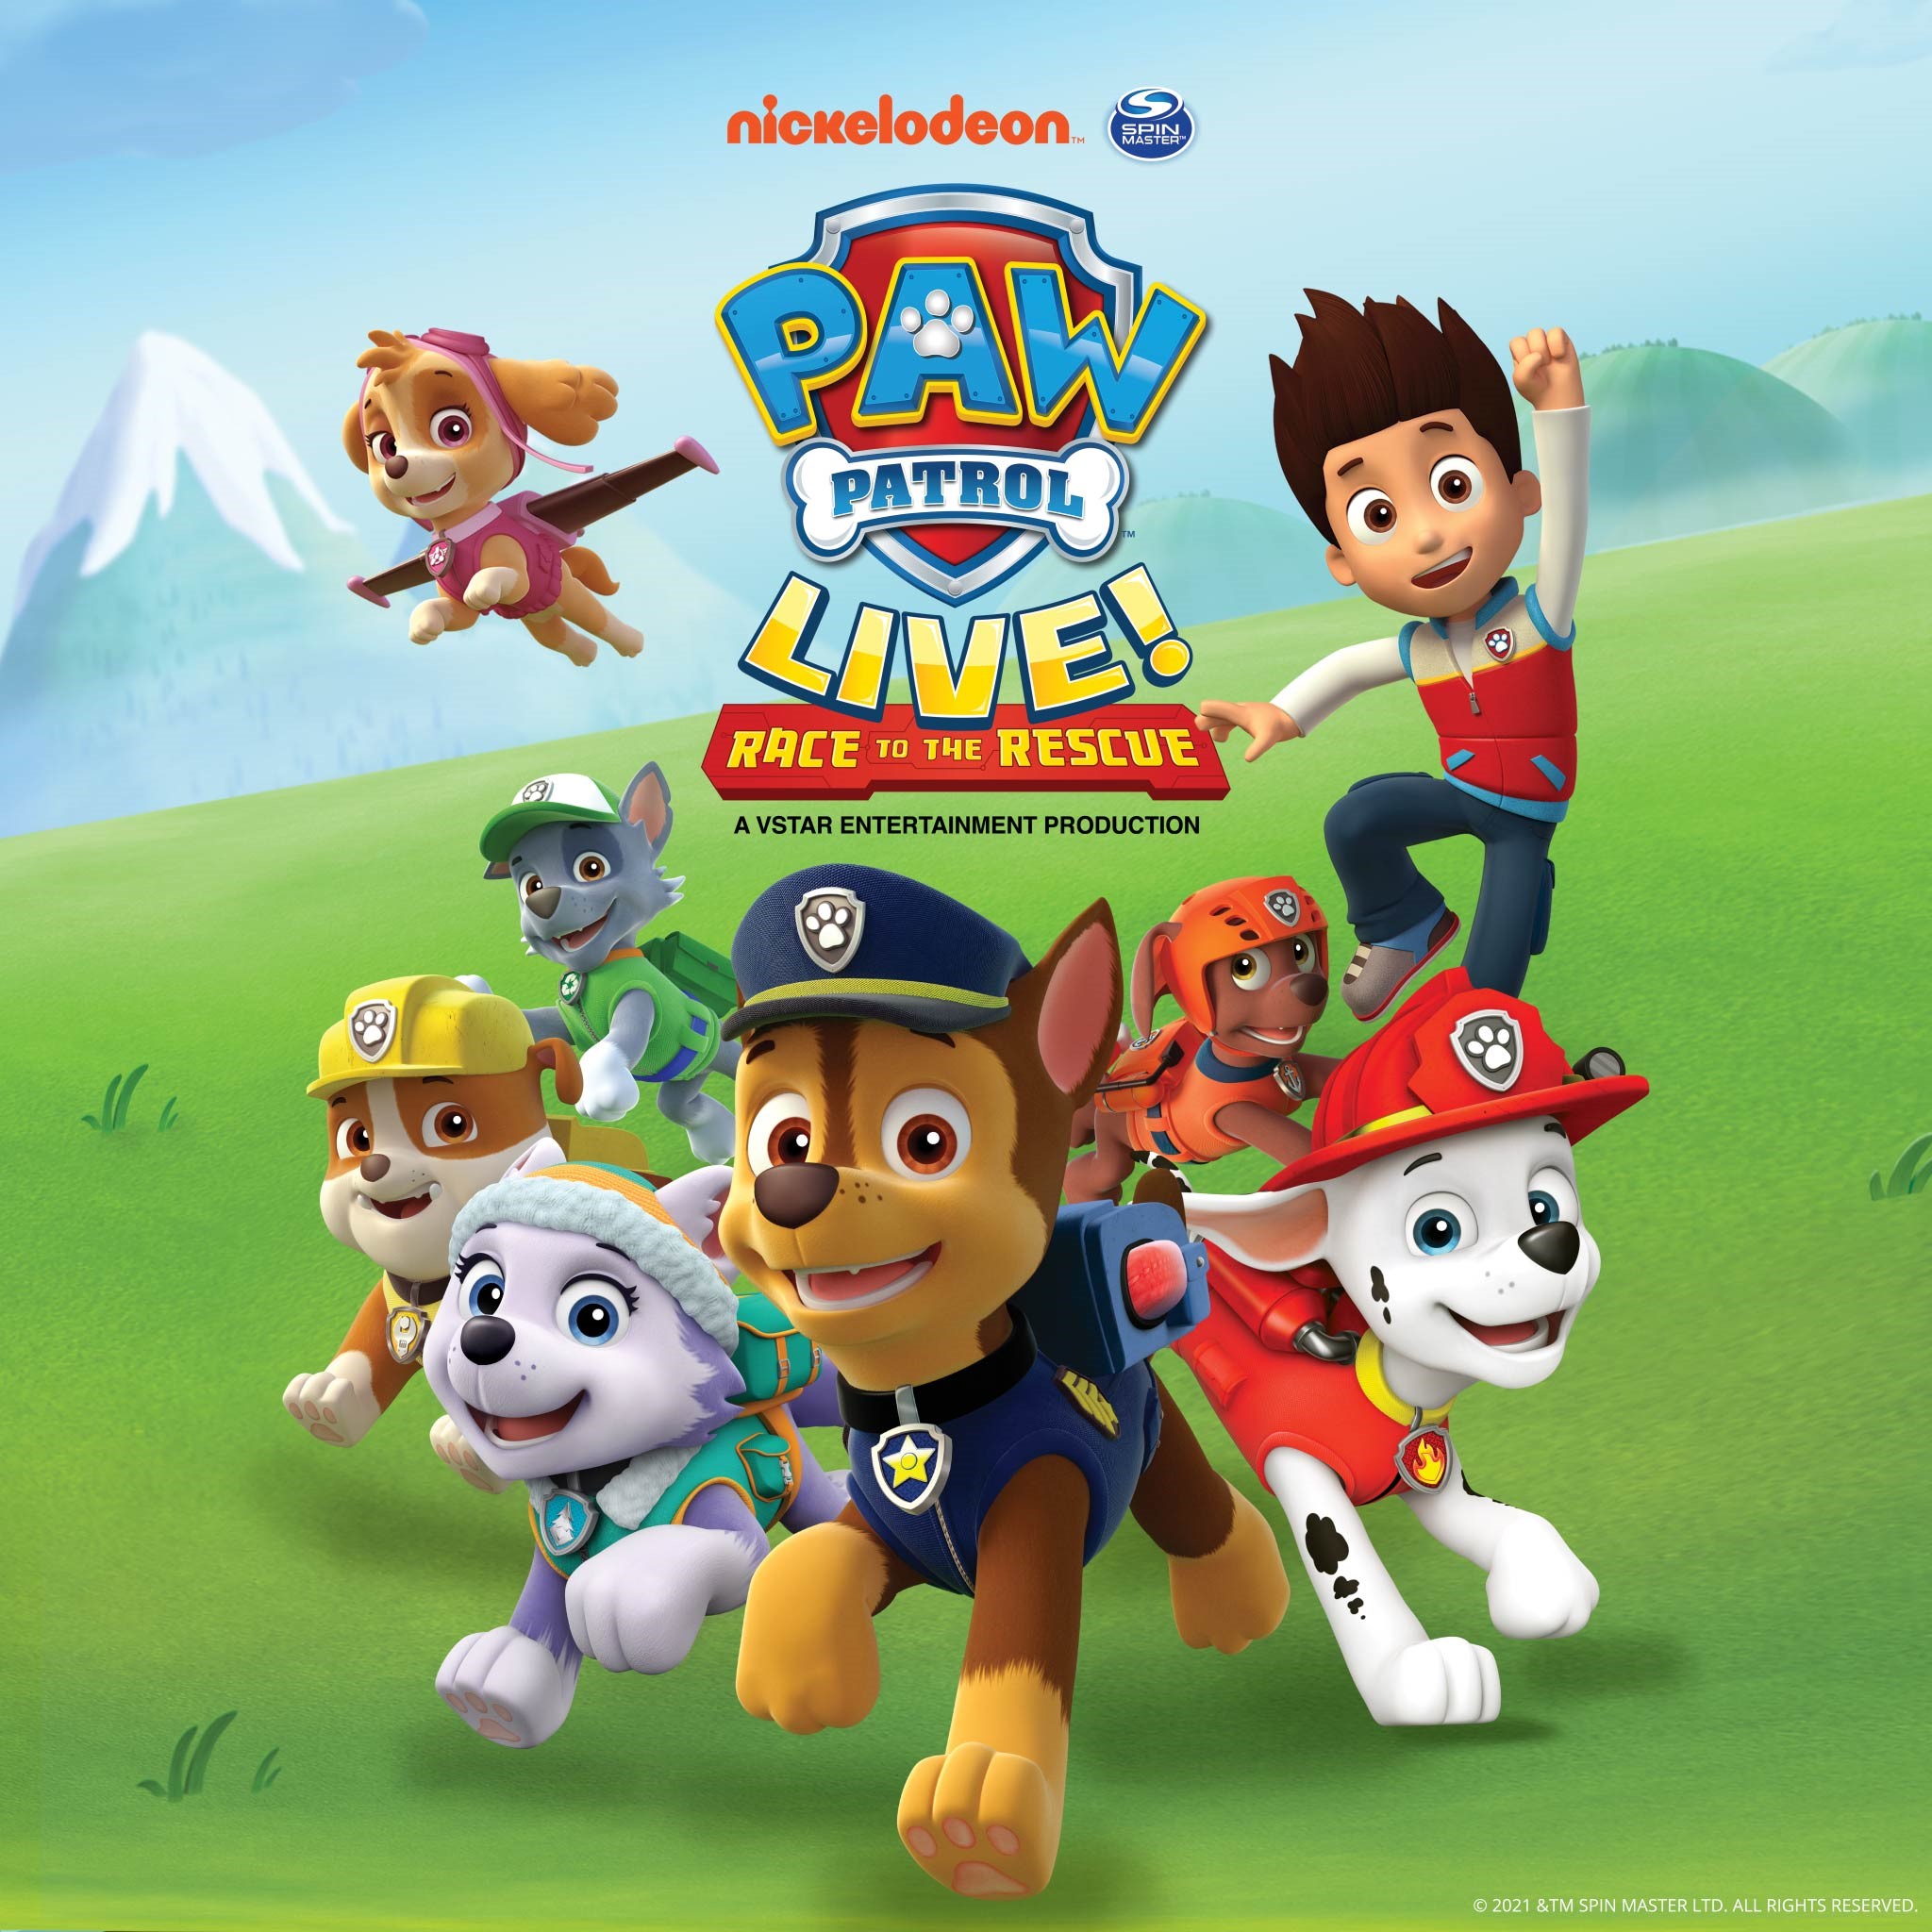 PAW Patrol™ Live! “Race to the Rescue” Brings Family Fun to Reading - BCTV